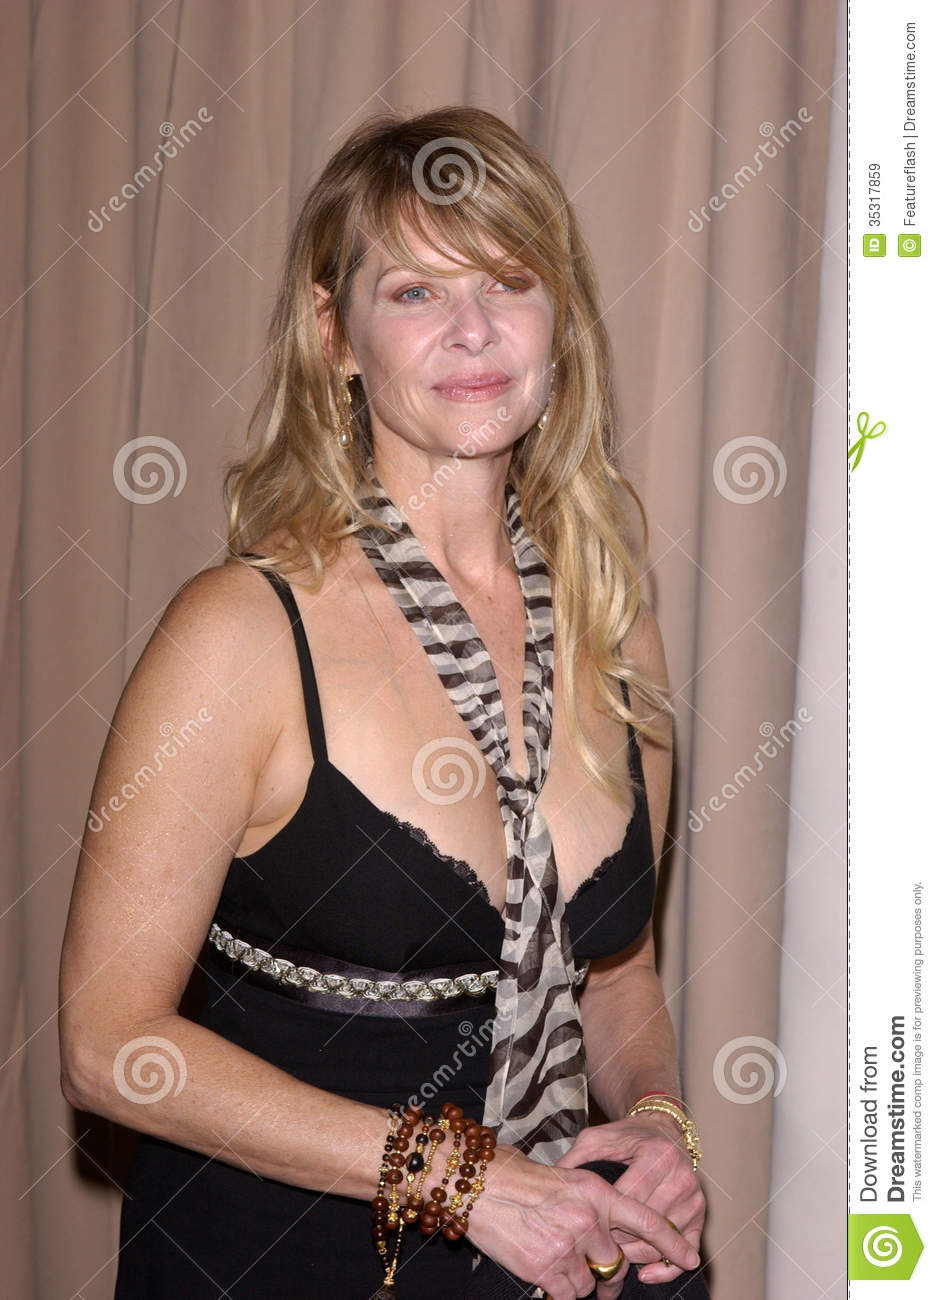 kate-capshaw-pictures